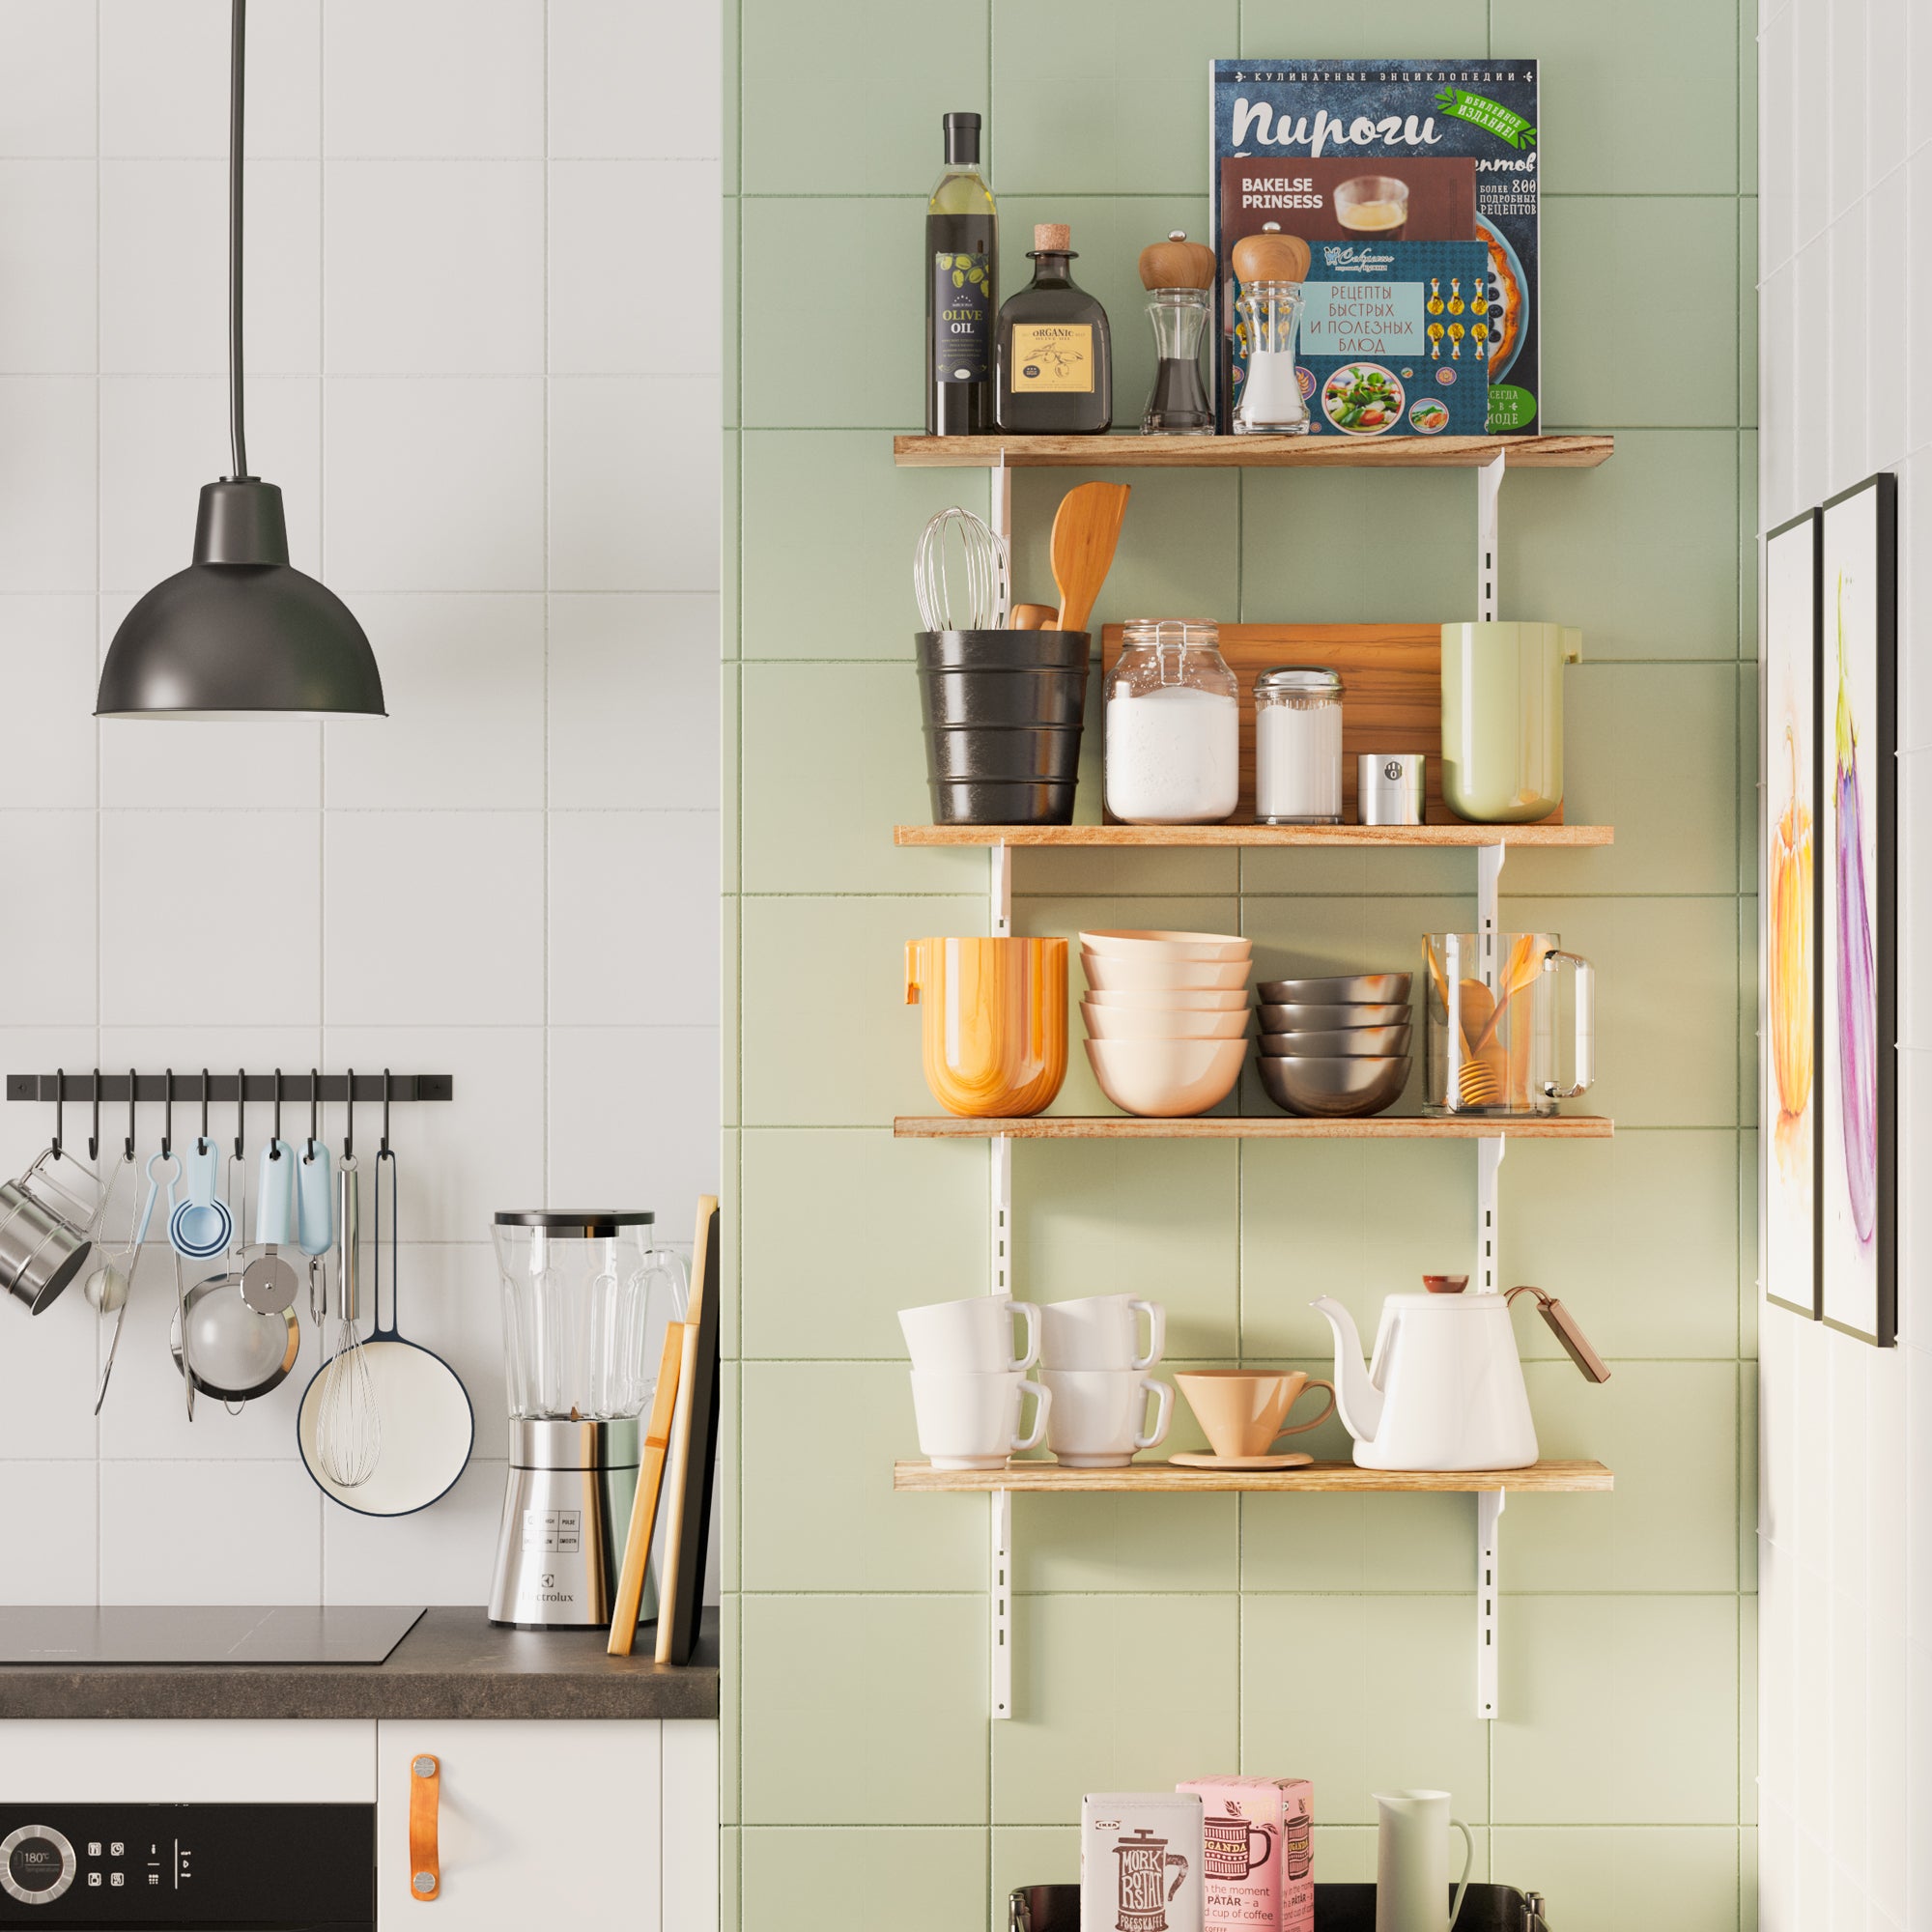 A kitchen wall with shelves for kitchen holding cooking utensils, pots, and ingredients.